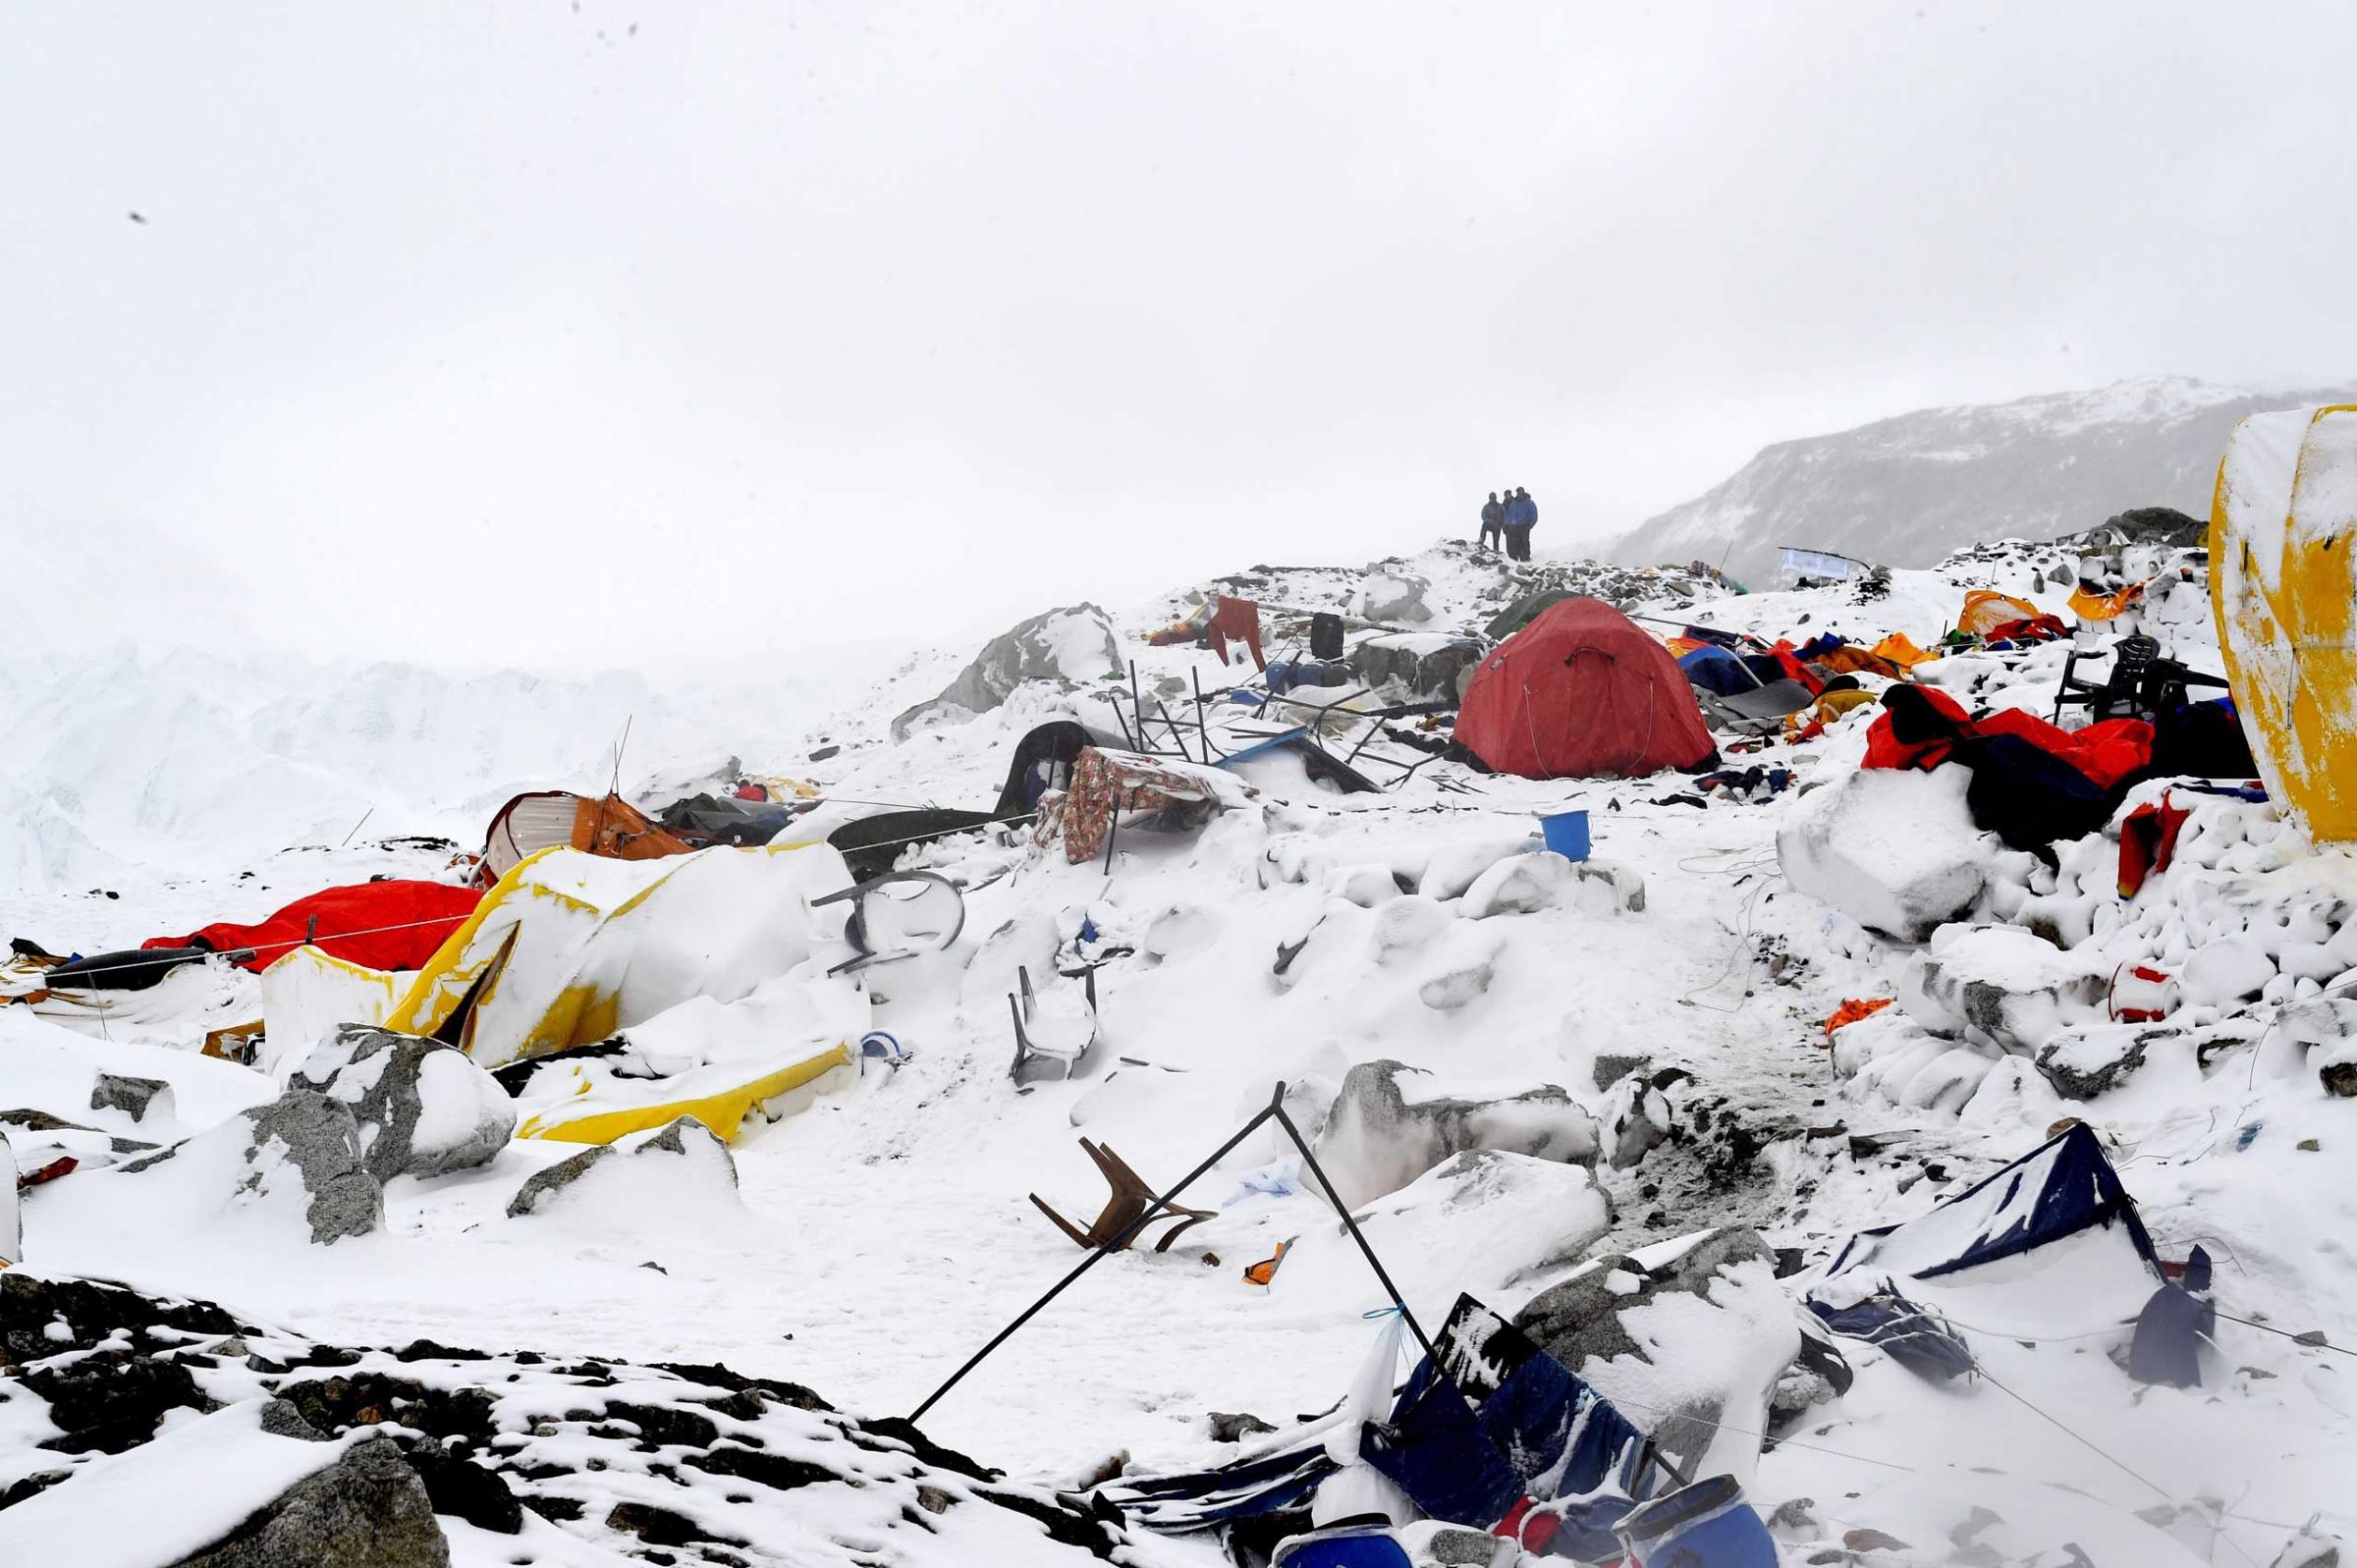 The avalanche, triggered by an earthquake outside Kathmandu, Nepal, flattened parts of Everest Base Camp on April, 25, 2015.